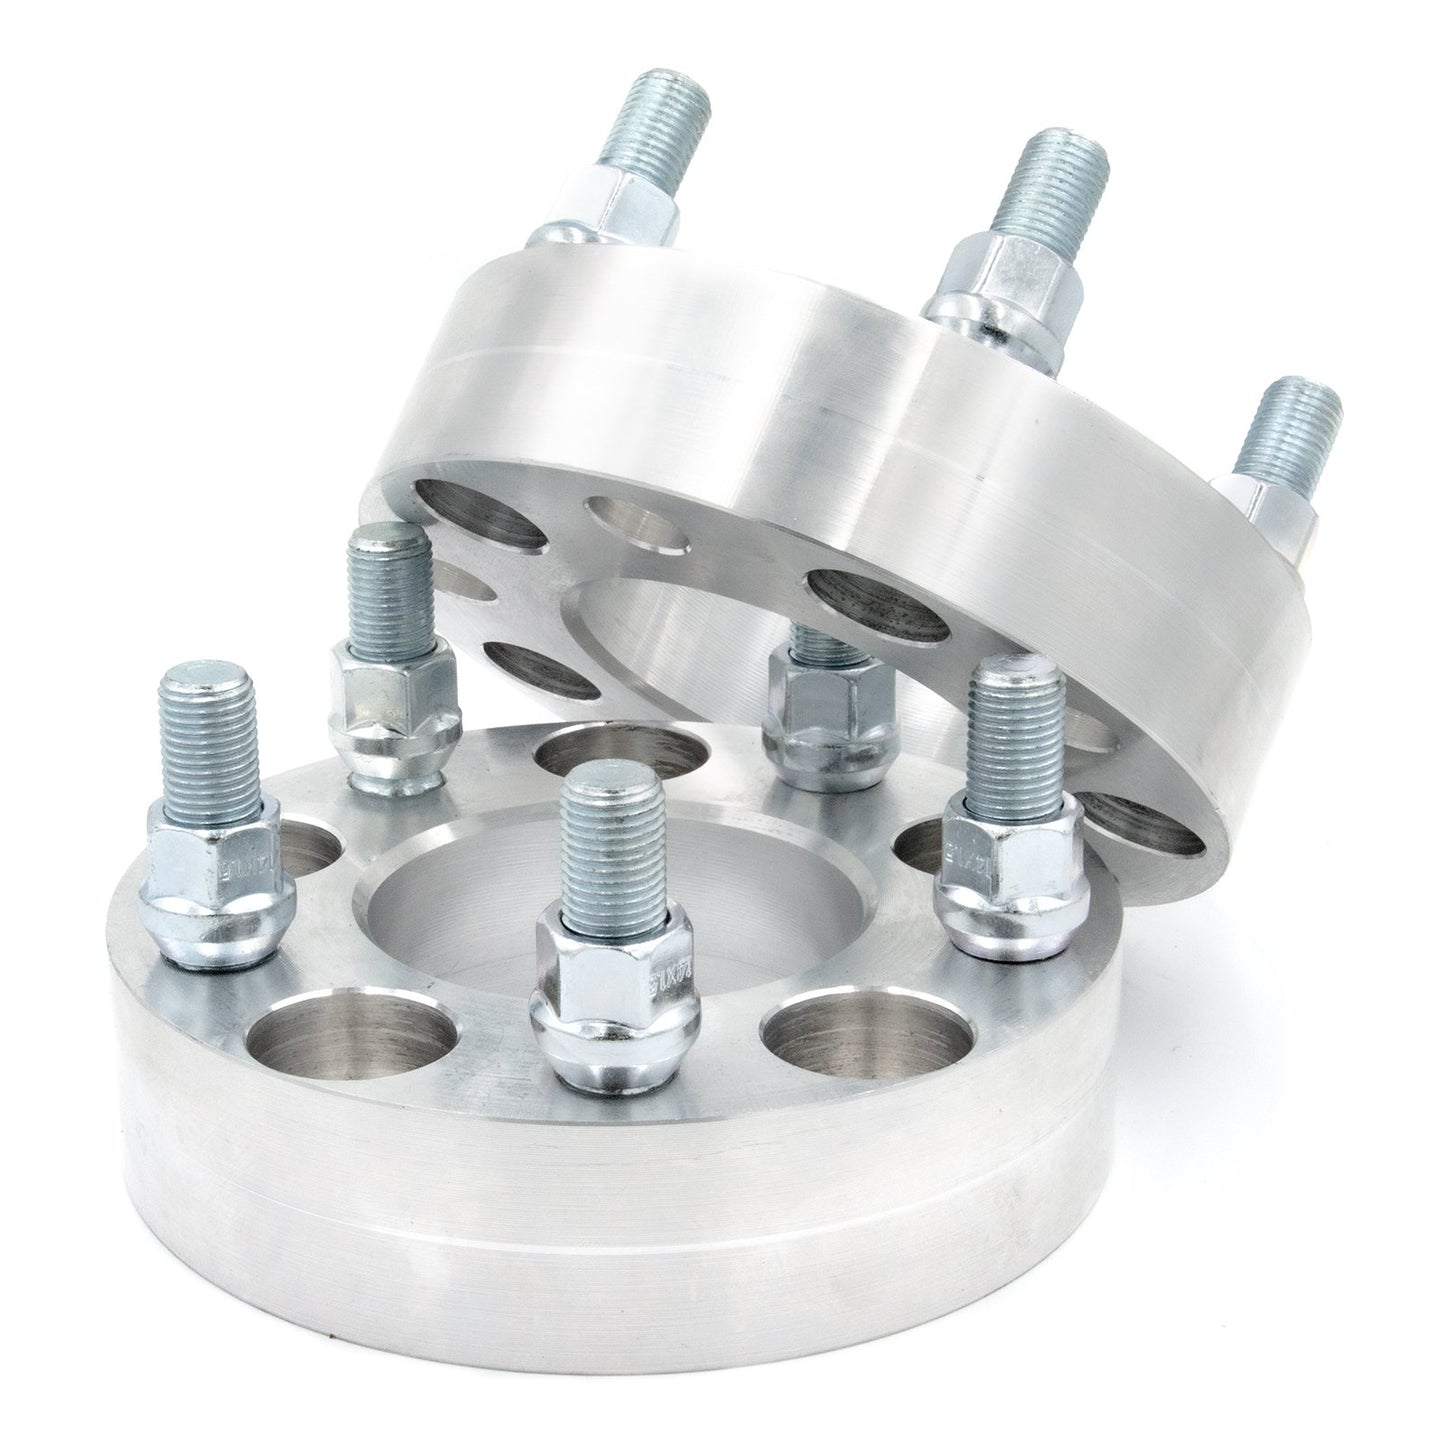 5x120 to 5x130 Wheel Spacer/Adapter - Thickness: 3/4"- 4"